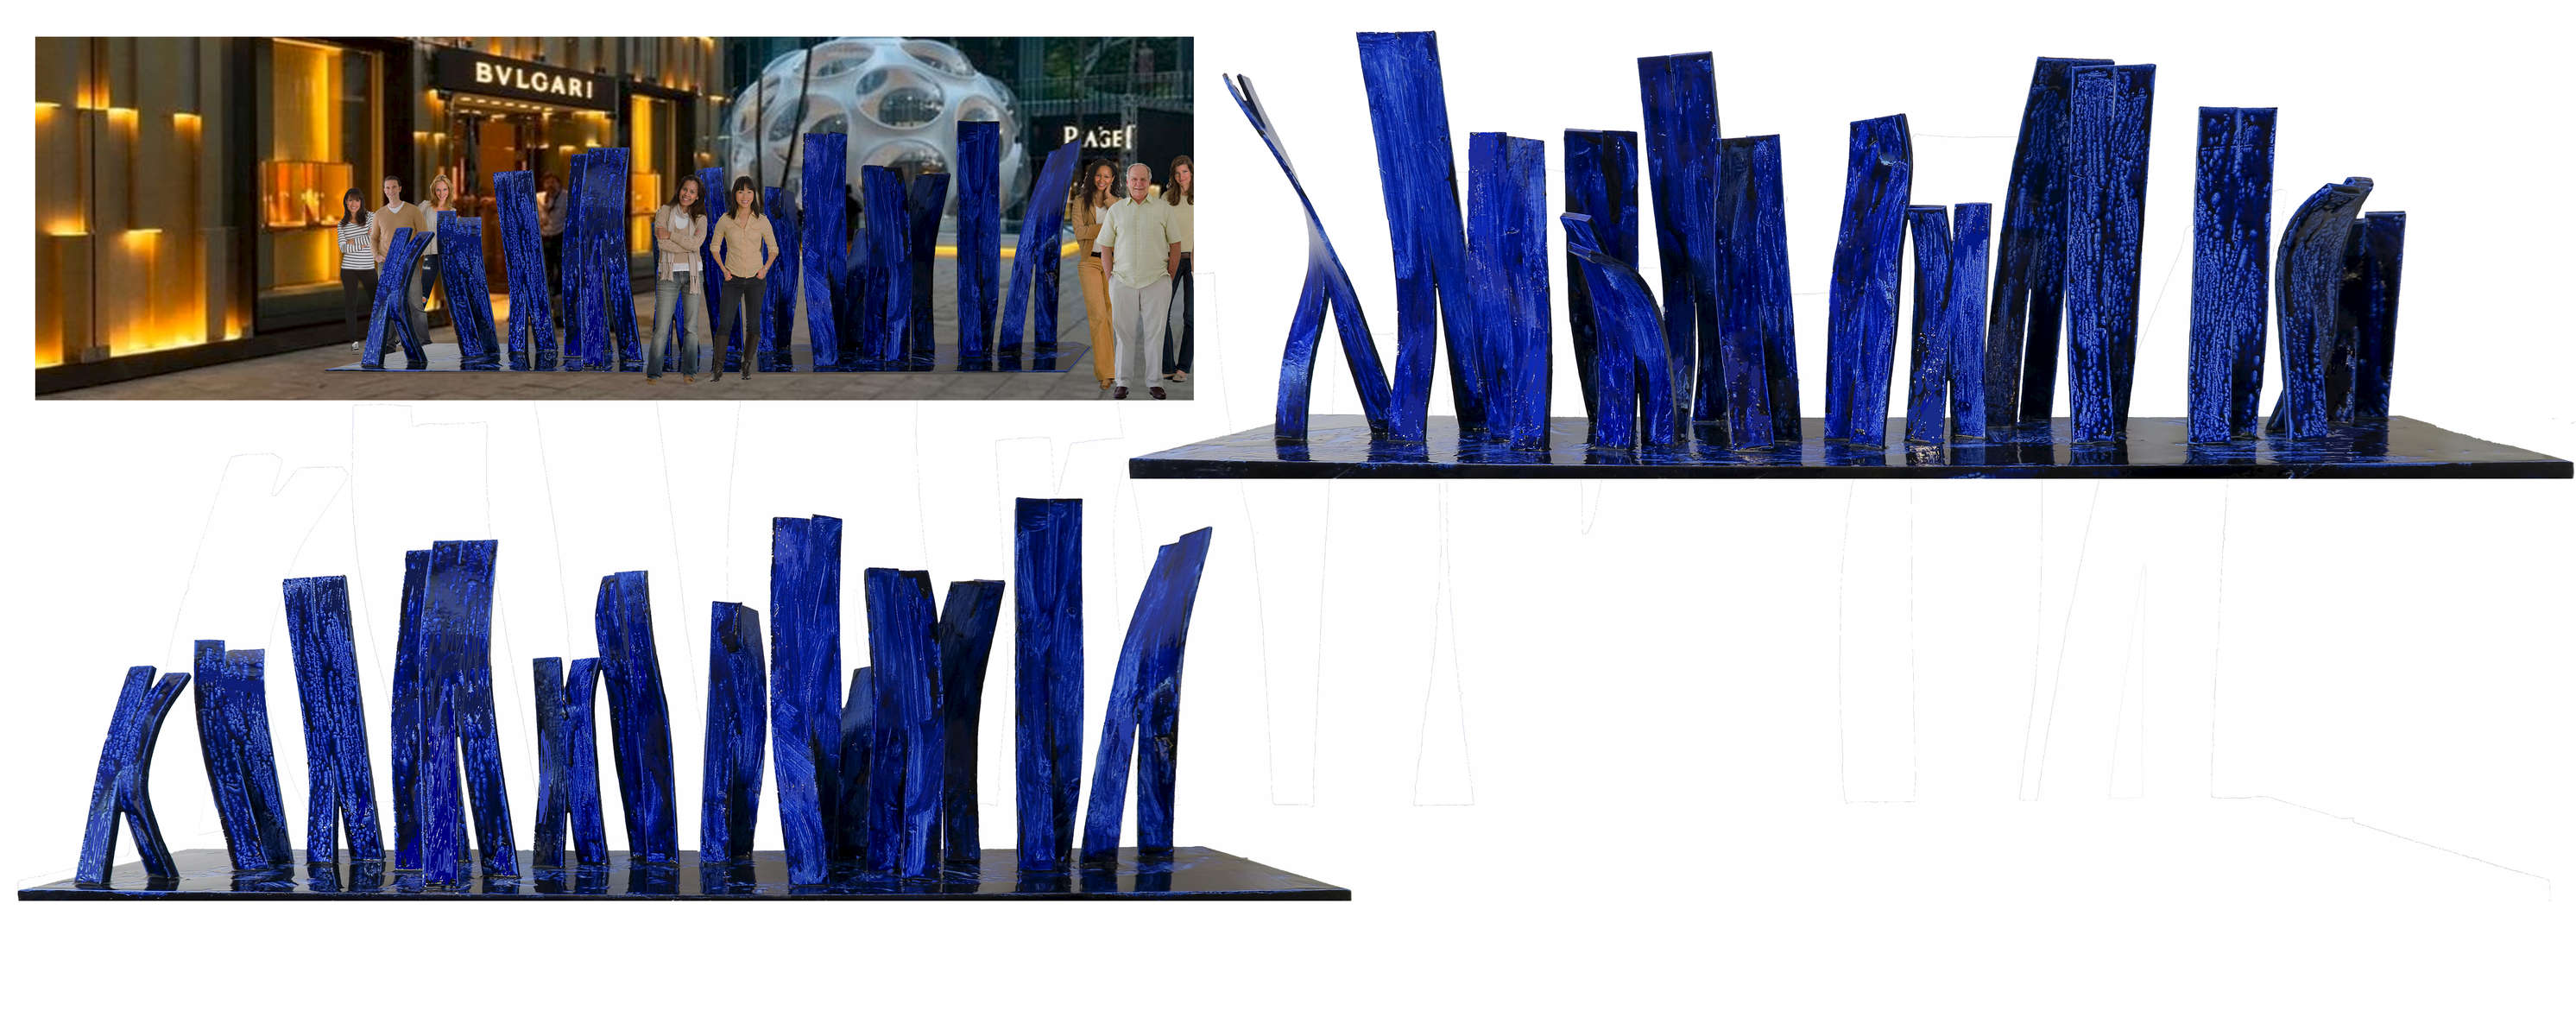 Proposal for a temporary installation at miami Design District